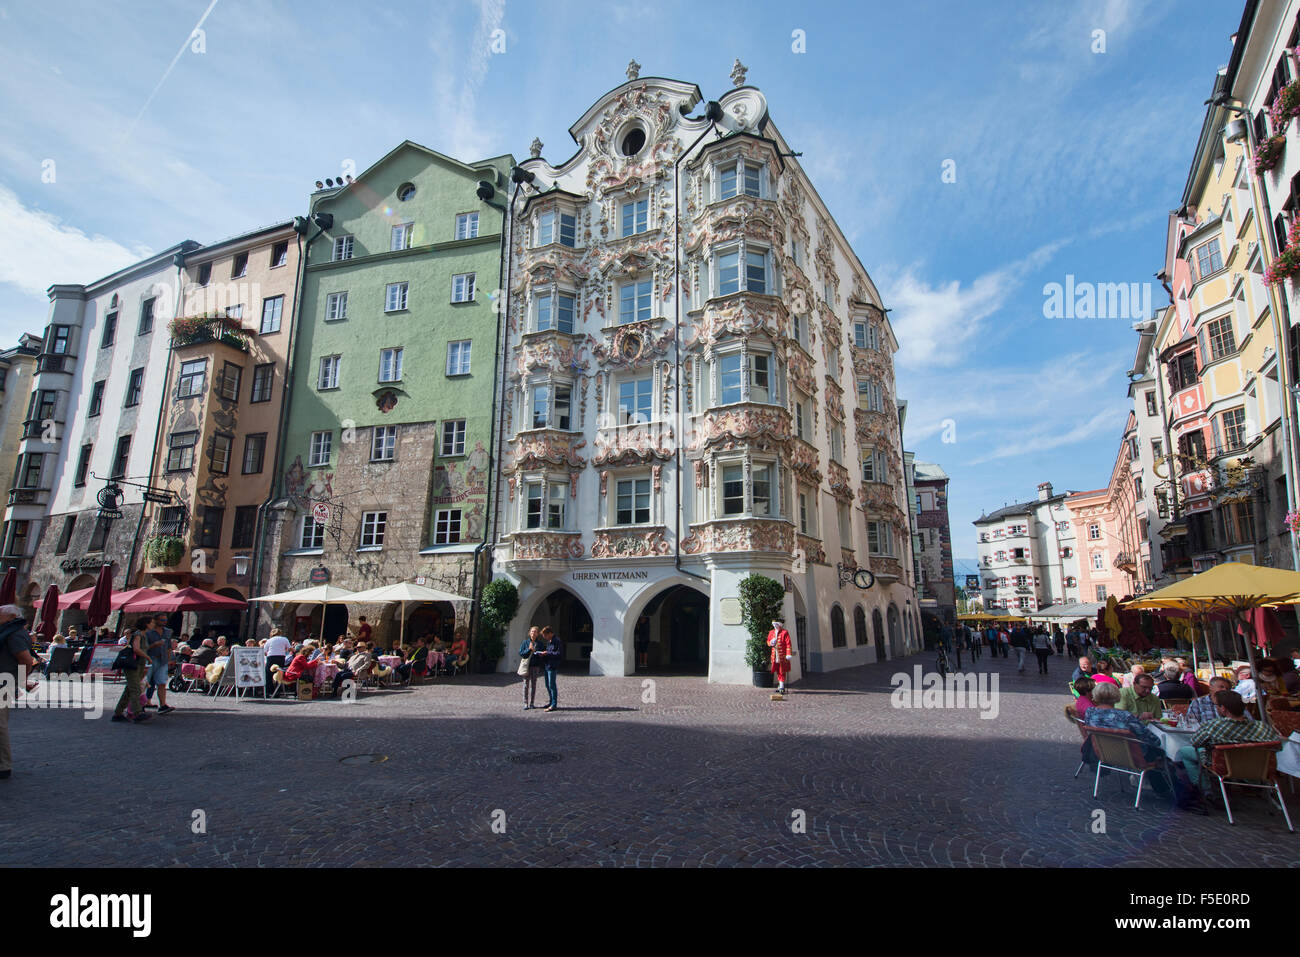 The beautiful Helblinghaus (Casa Helbling), a Baroque and Gothic building in the Old Town of innsbruck, Austria Stock Photo